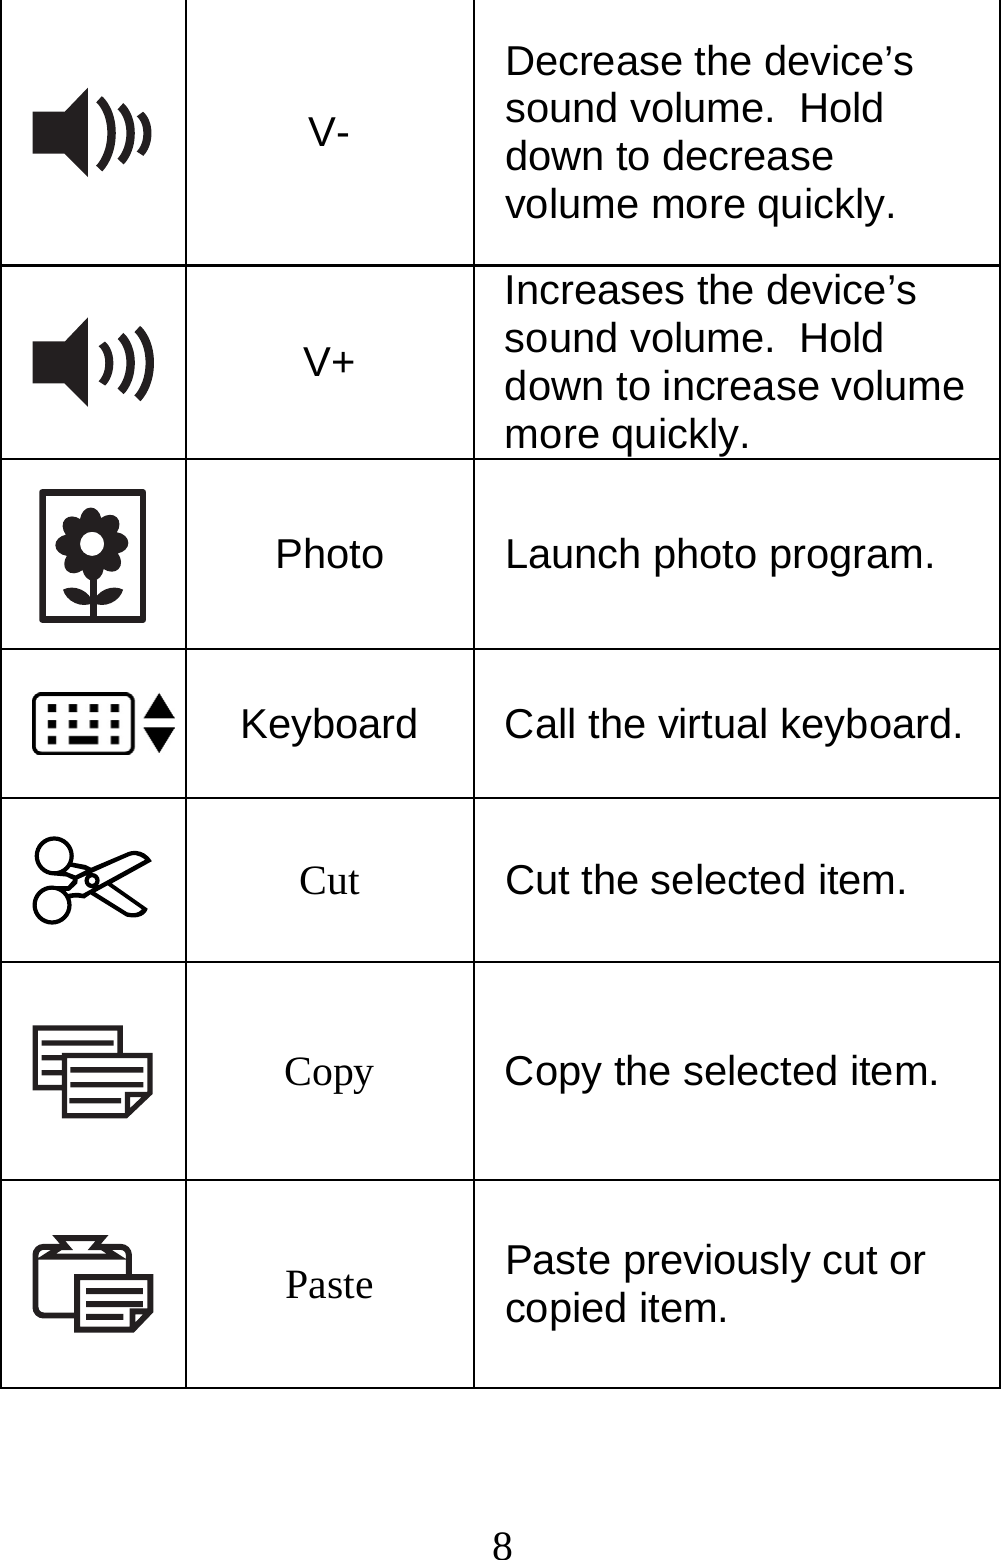  8 V- Decrease the device’s sound volume.  Hold down to decrease volume more quickly.  V+ Increases the device’s sound volume.  Hold down to increase volume more quickly.  Photo  Launch photo program.  Keyboard  Call the virtual keyboard. Cut  Cut the selected item.  Copy  Copy the selected item.  Paste  Paste previously cut or copied item. 